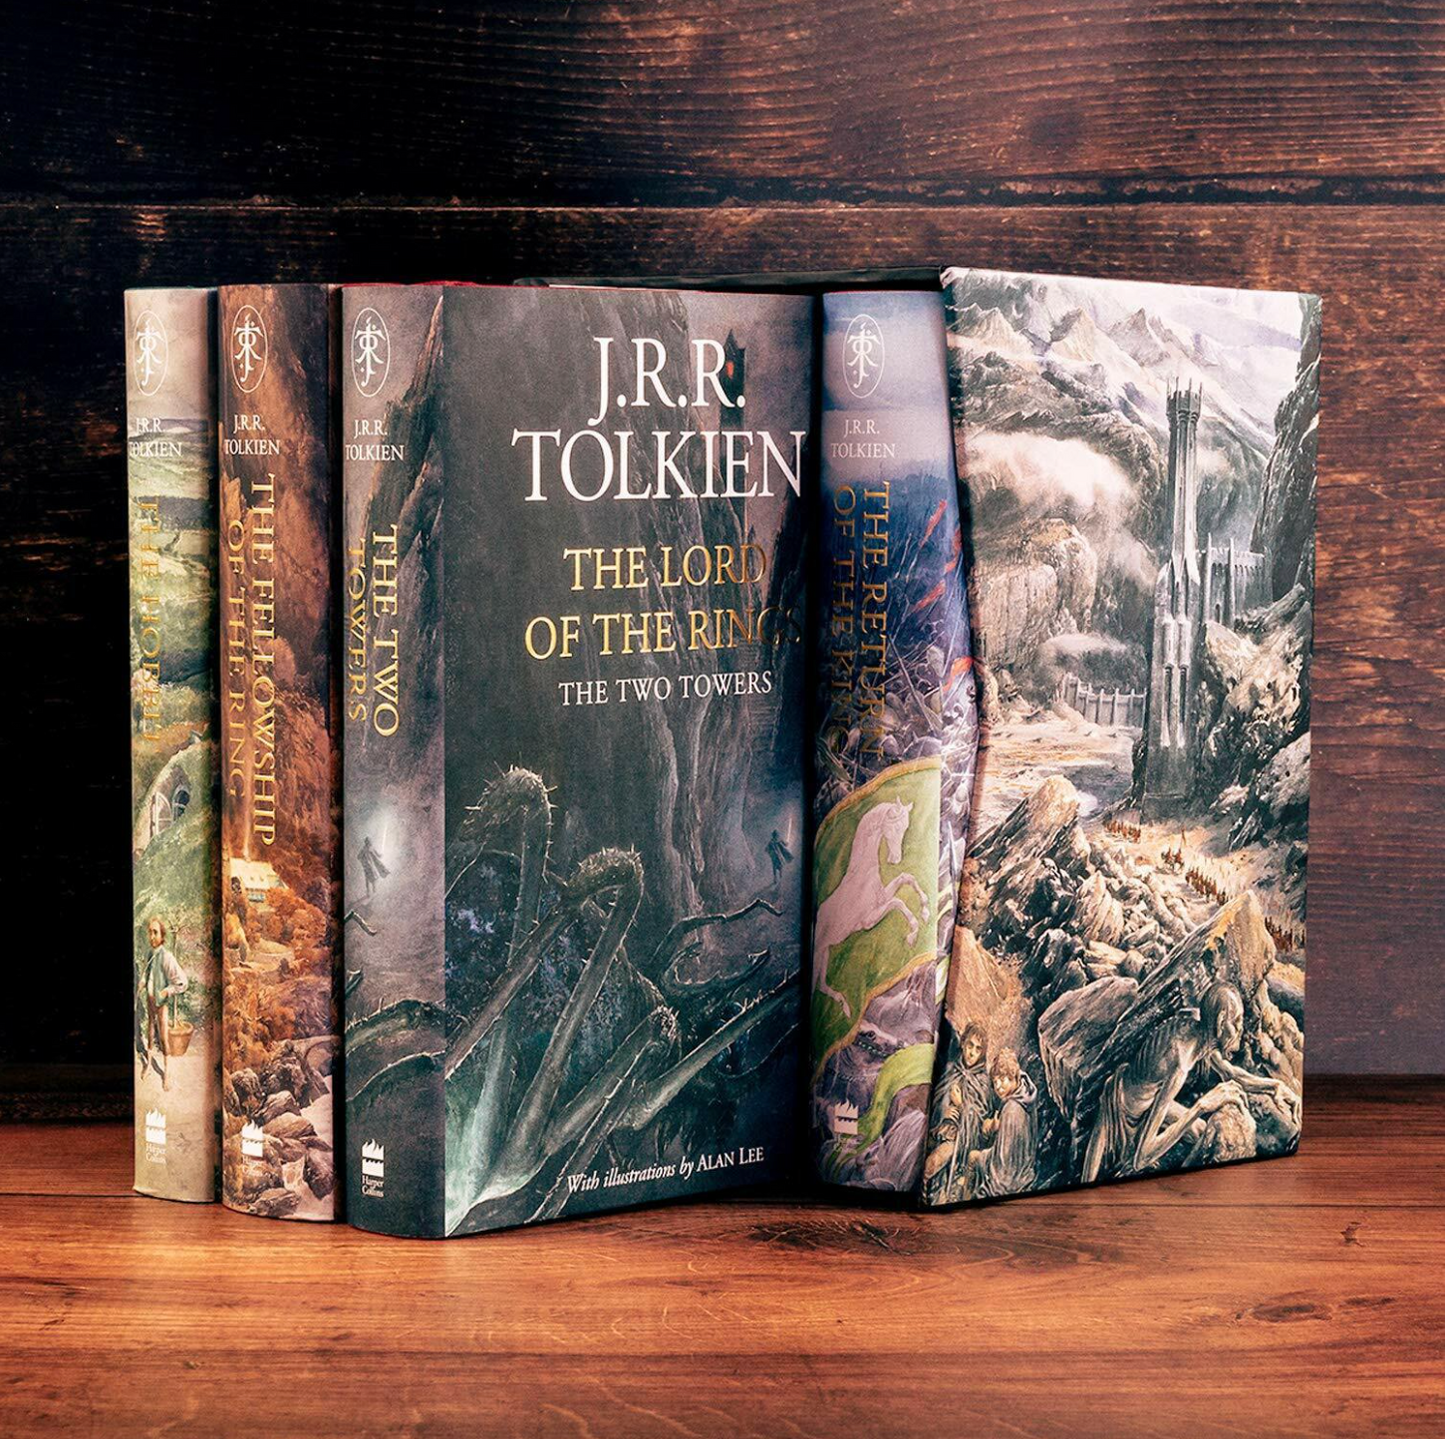 The Hobbit & The Lord Of The Rings Boxed Book Sets